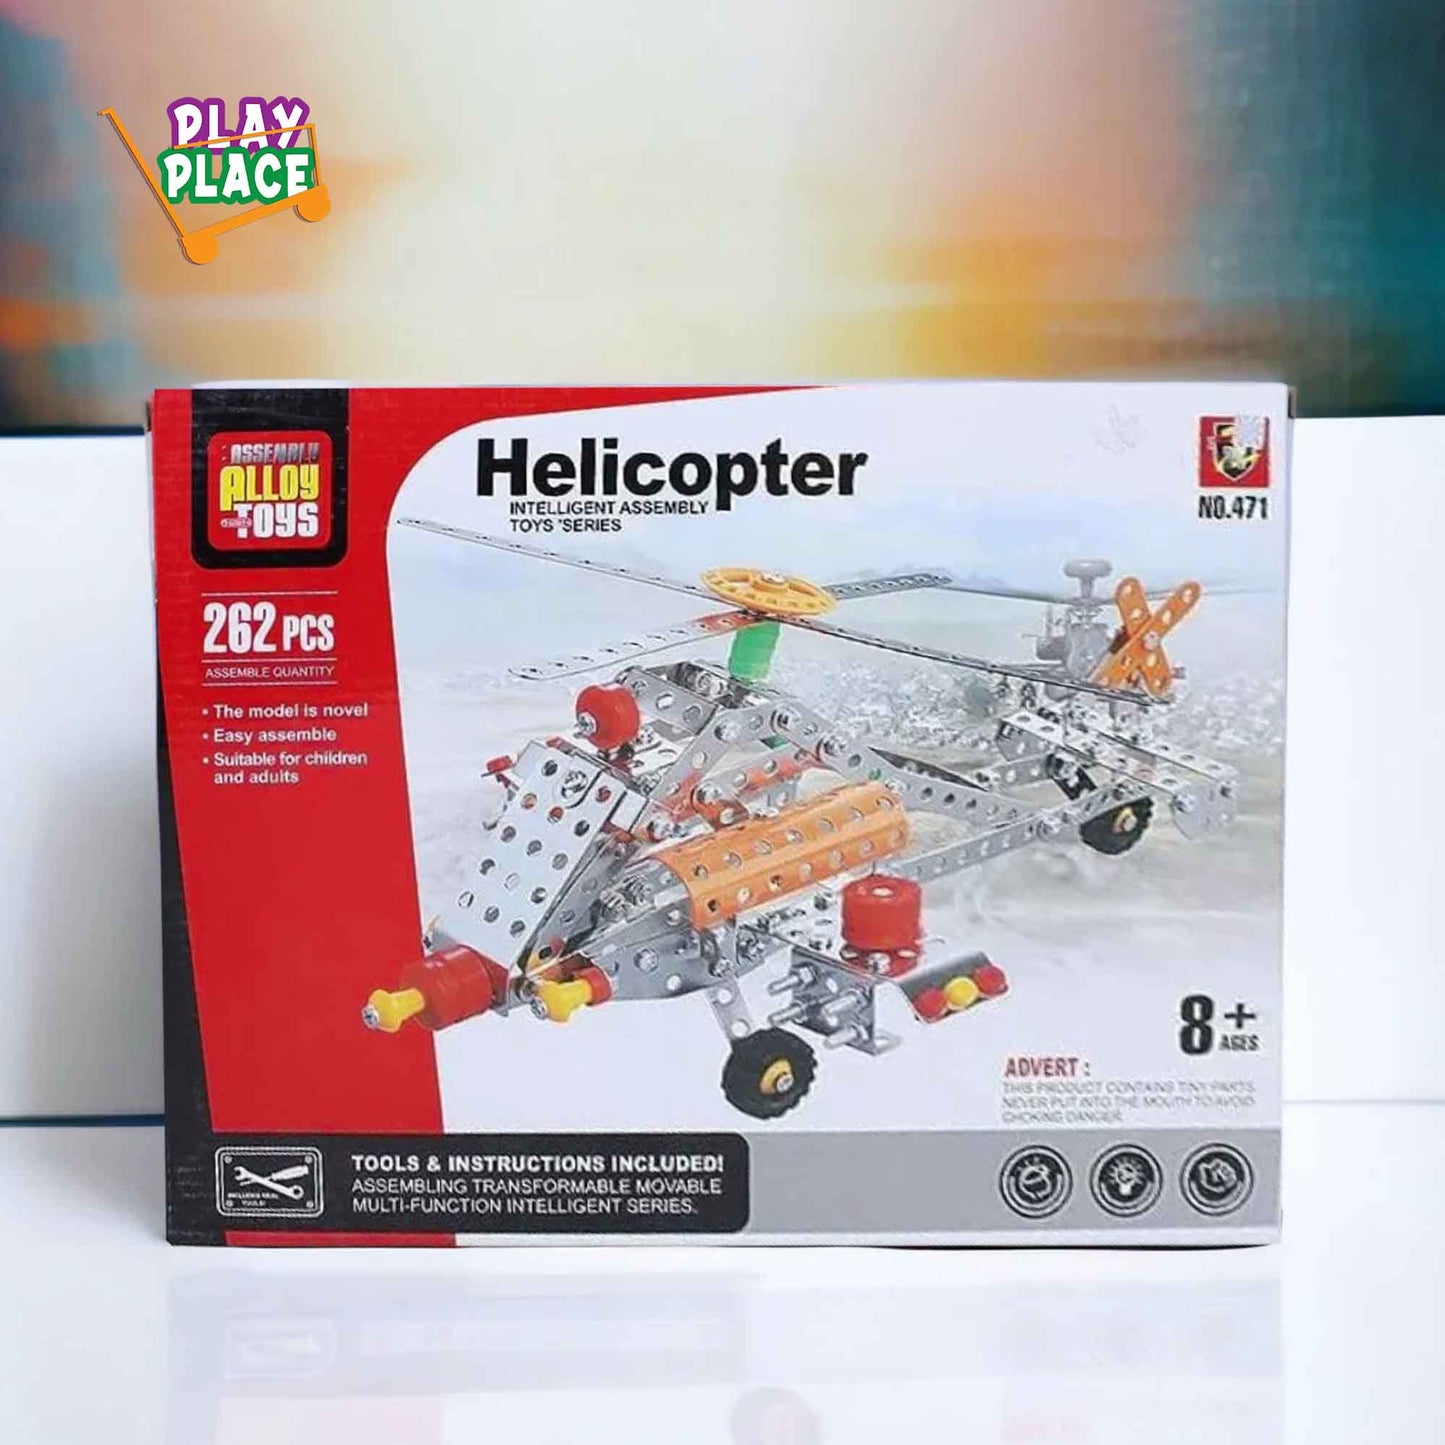 Helicopter Intelligent Connect Assembly Toy Series